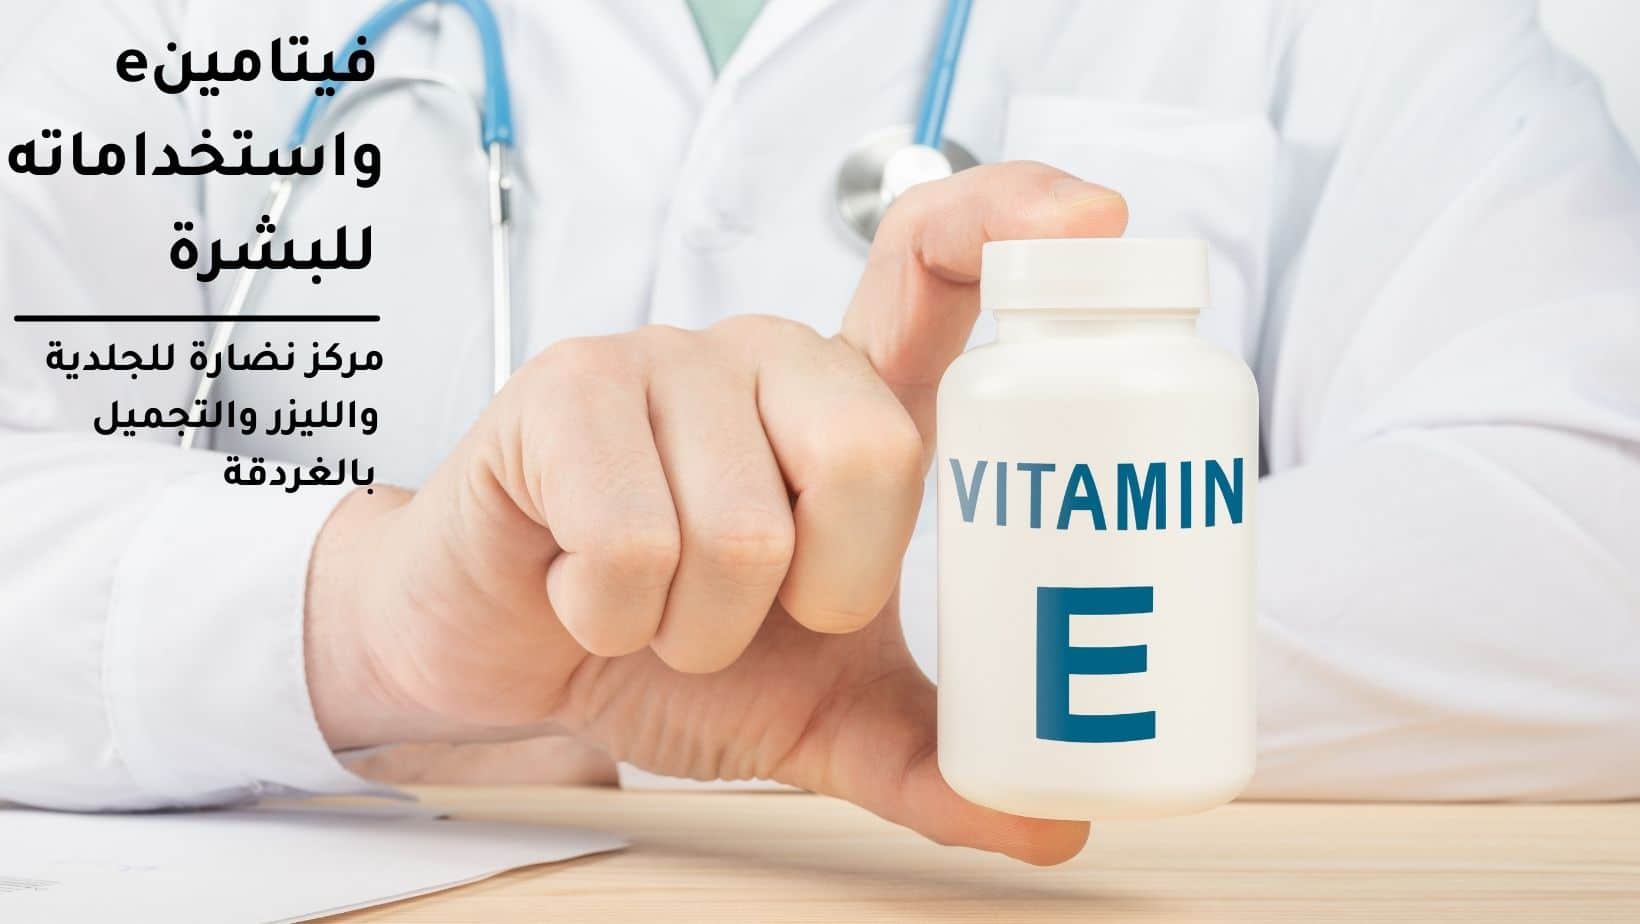 Vitamin E and its uses for the skin